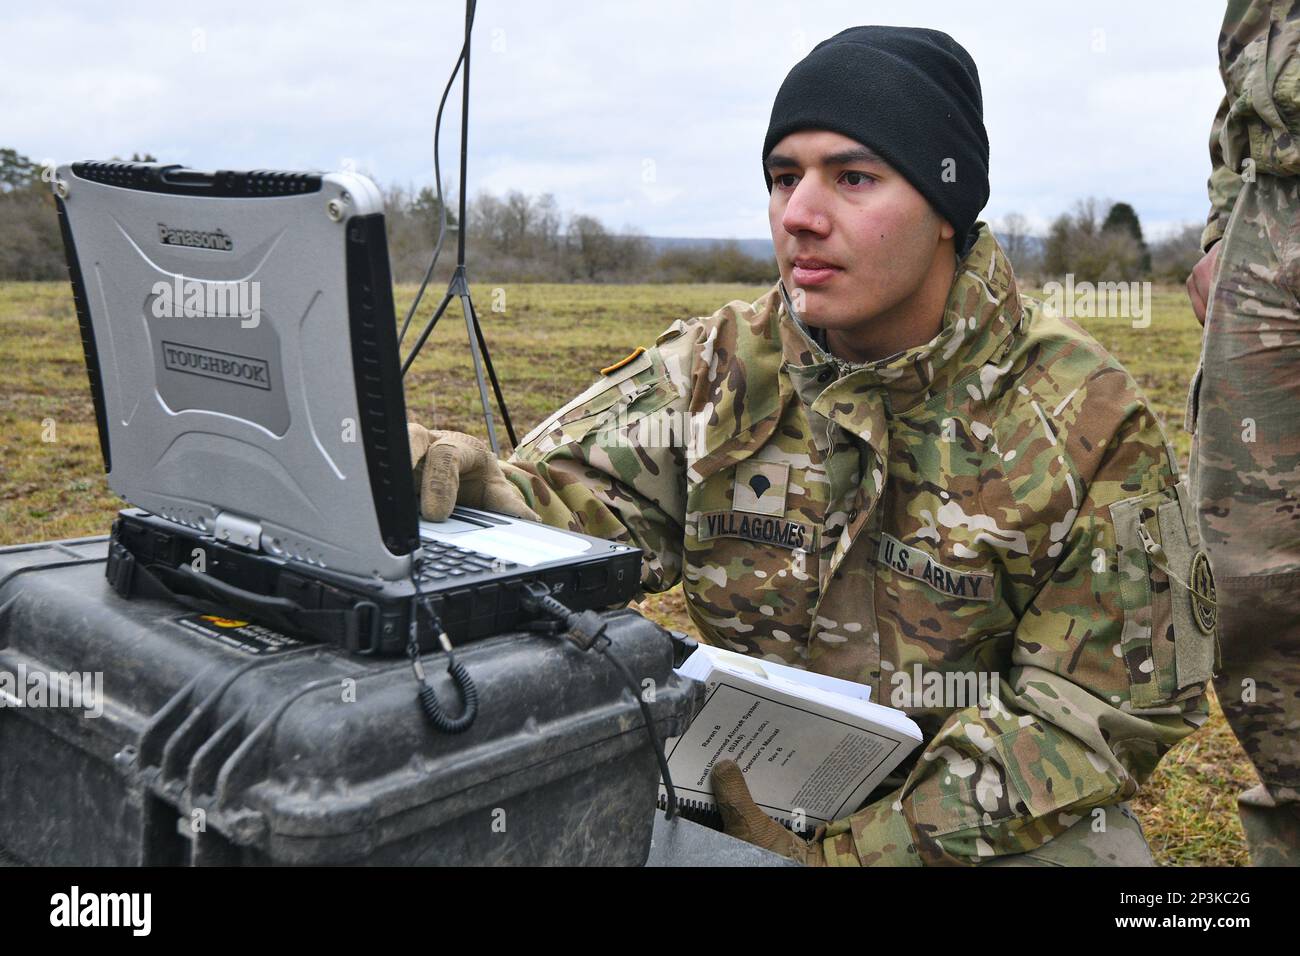 U.S. Army Spc. Diego Villagomes with Palehorse Troop, 4th Squadron, 2nd Cavalry Regiment operates a monitor during a training exercise with an RQ-11 Raven, a Small Unmanned Aircraft System, at the 7th Army Training Command’s Grafenwoehr Training Area, Germany, Jan. 10, 2023. 2CR provides V Corps with a lethal and agile force capable of rapid deployment throughout the European theater in order to assure allies, deter adversaries, and when ordered, defend the NATO alliance. Stock Photo